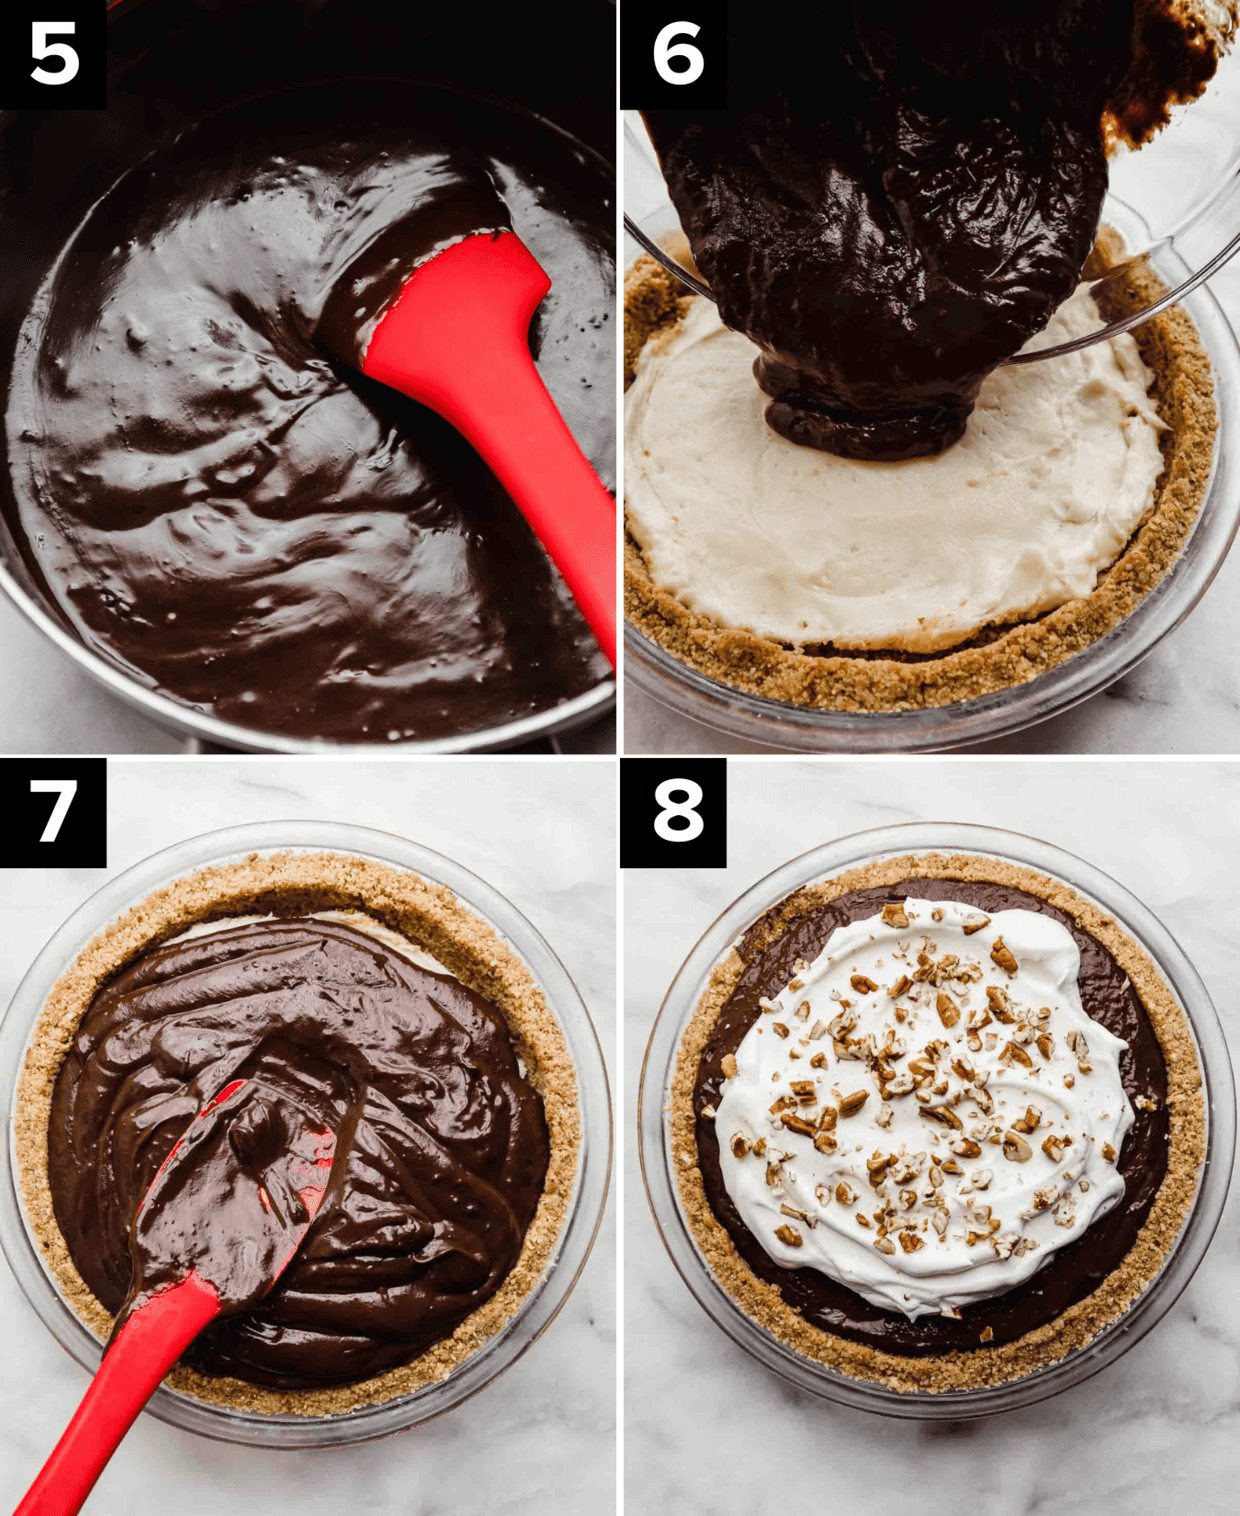 Four images showing Chocolate pudding being poured over a cream cheese filled pie crust, then a red spatula spreading into an even layer, and finally whipped cream with pecan garnish over the chocolate pudding possum pie. 